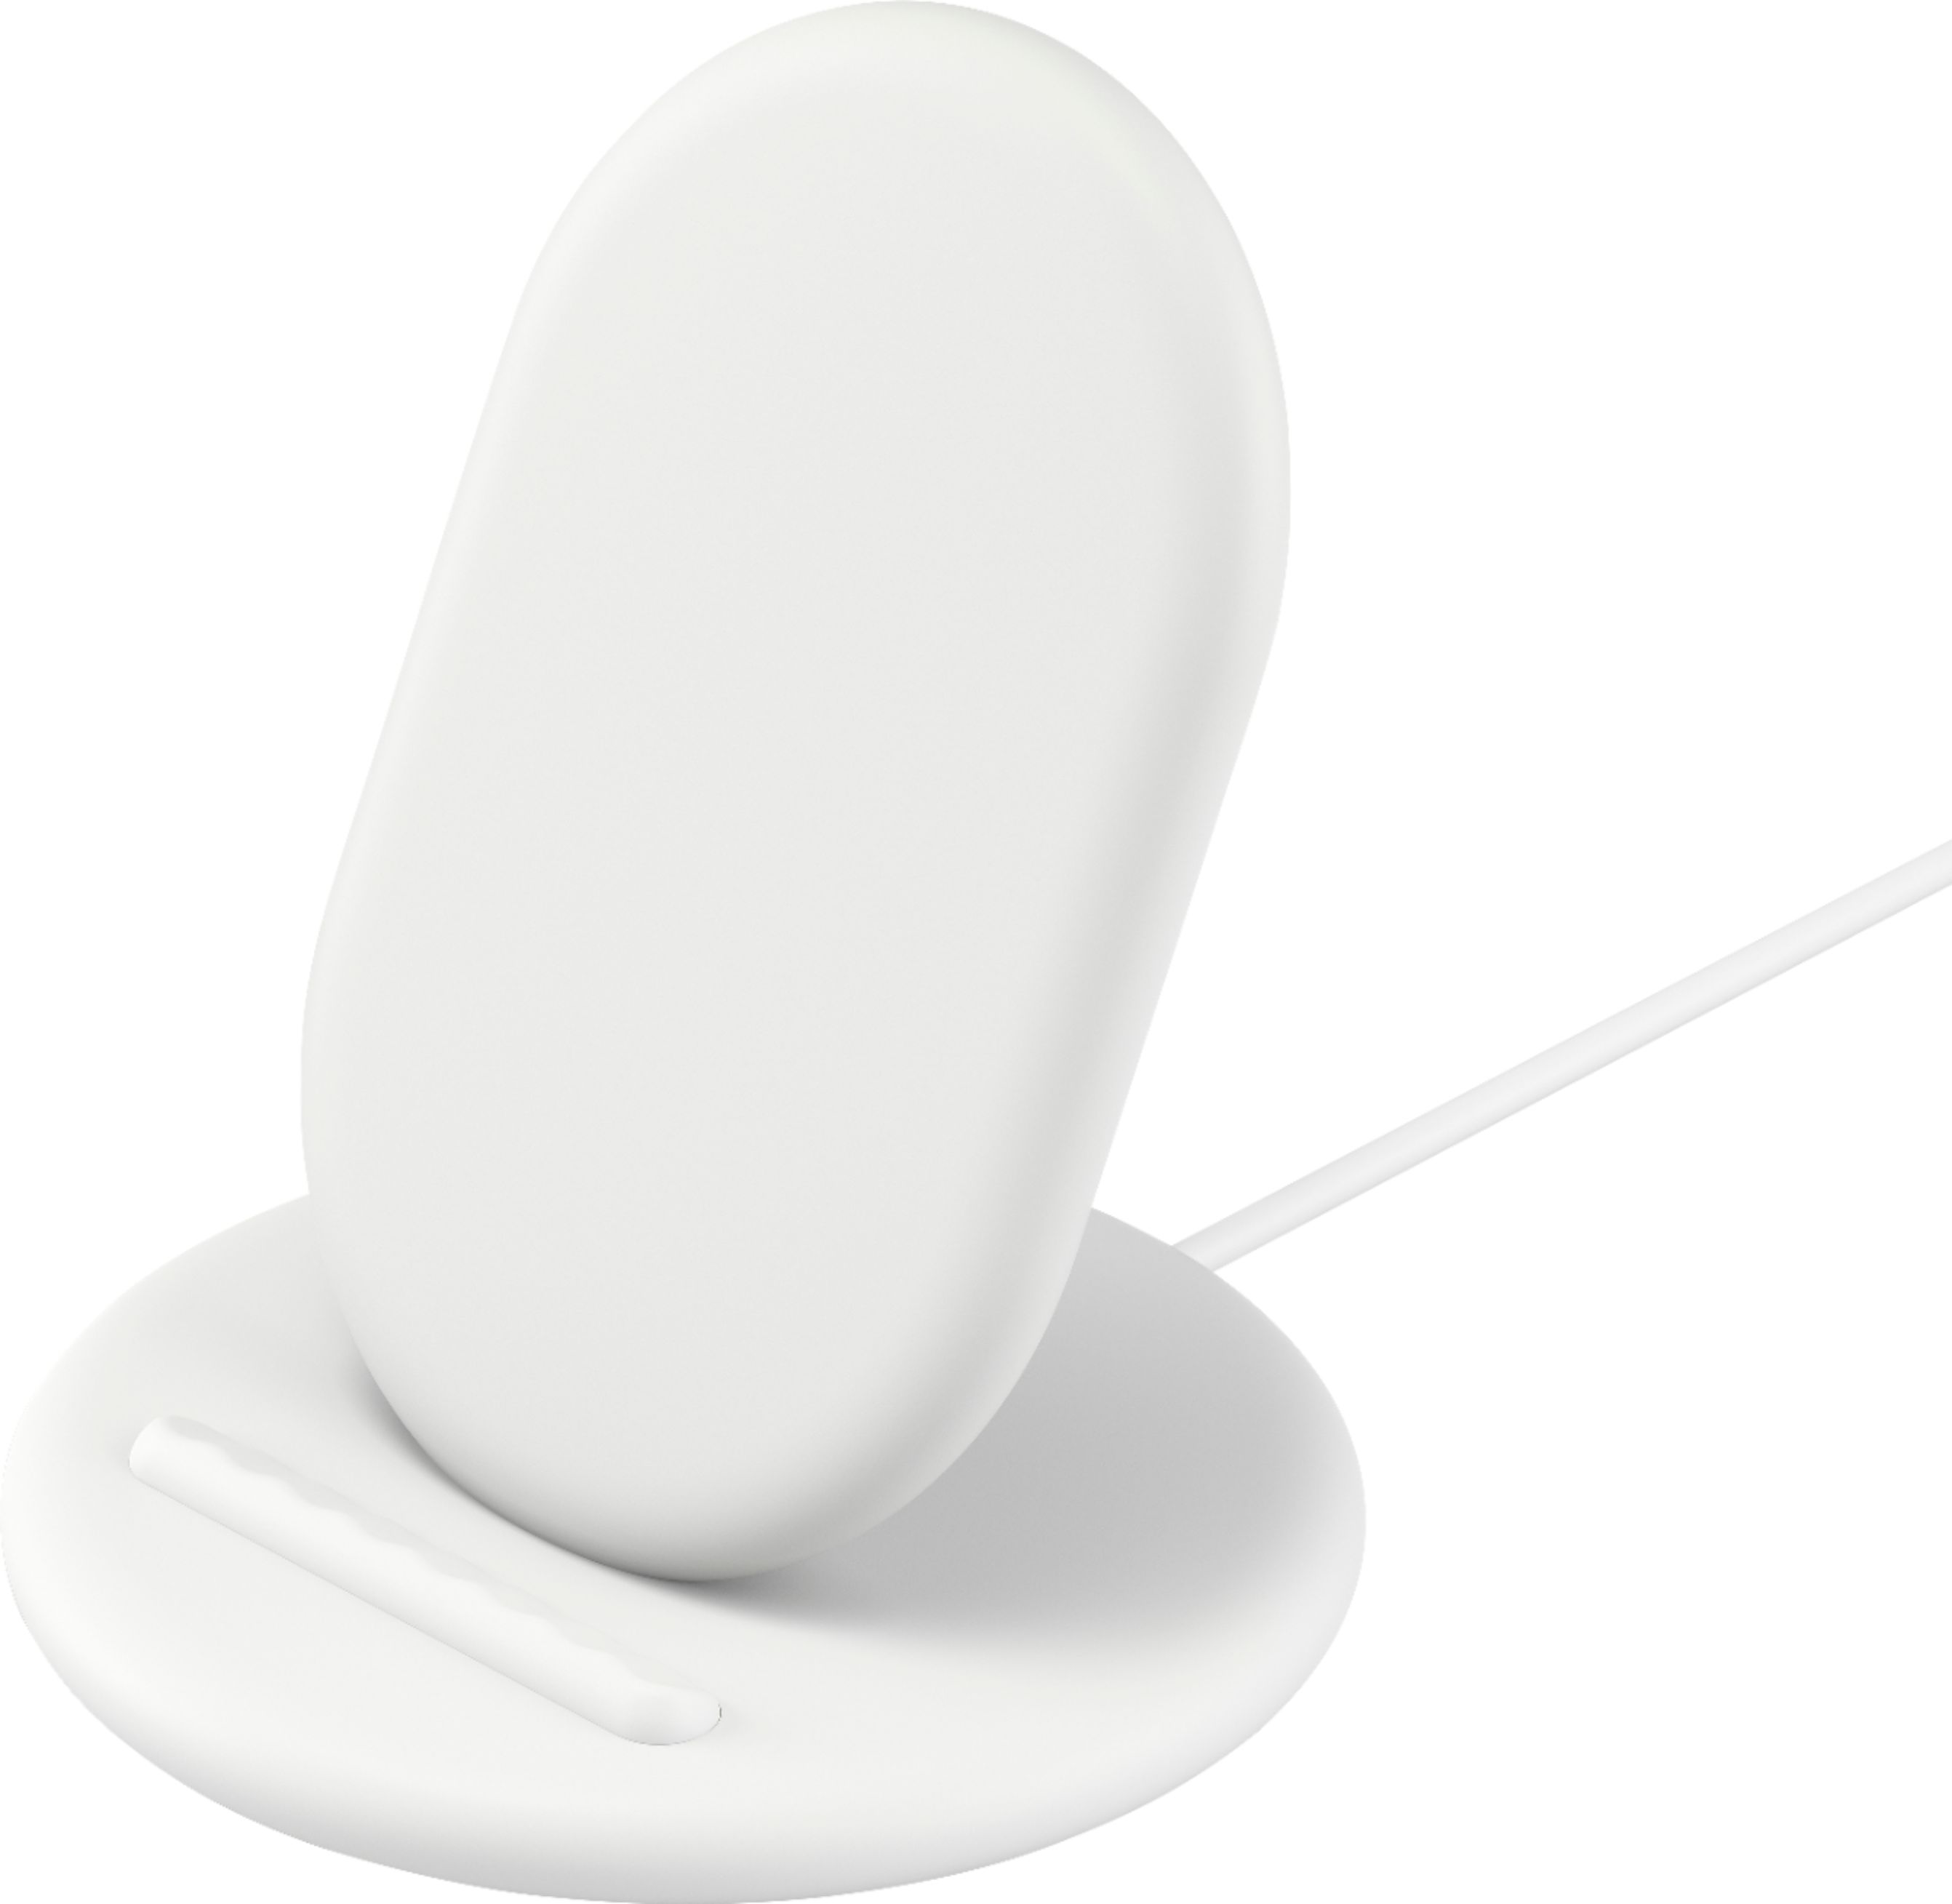 Pixel Stand for Google Pixel Cell Phones - White